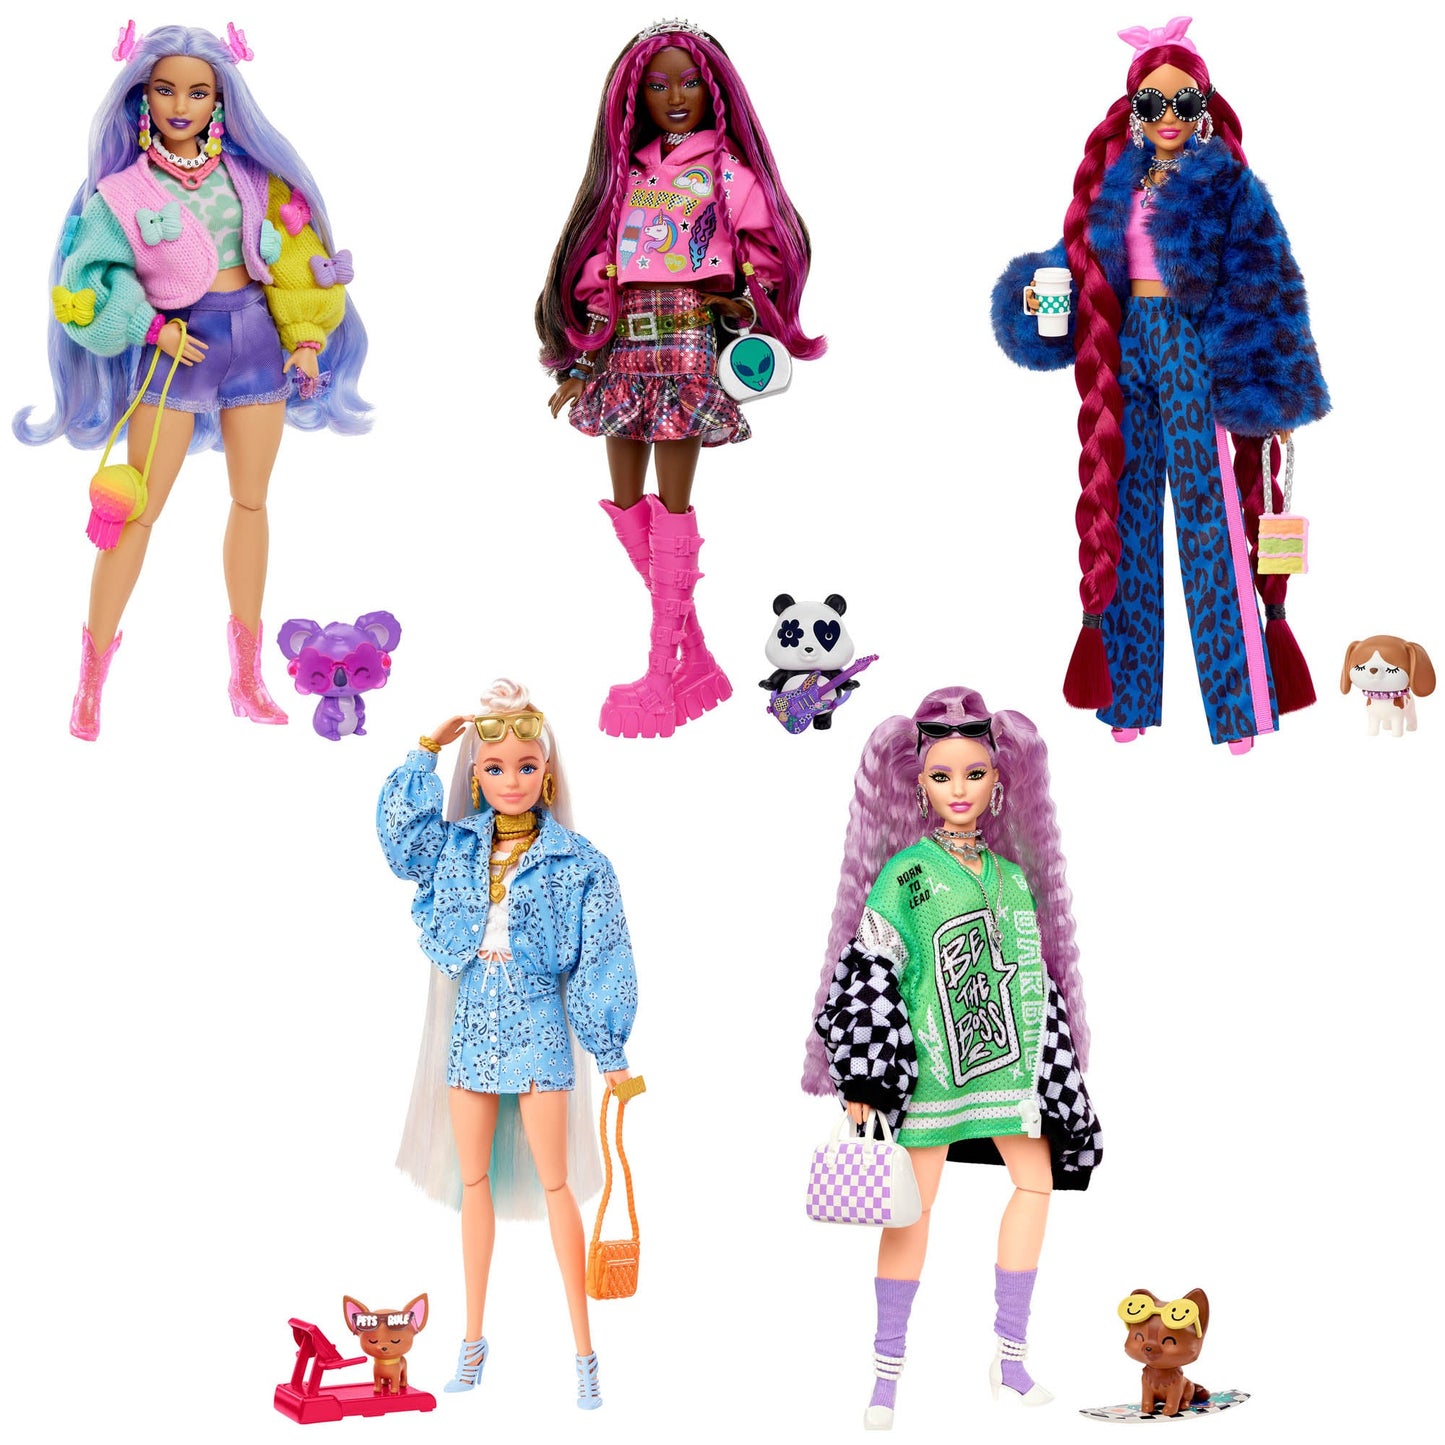 Barbie Extra Doll and Accessories